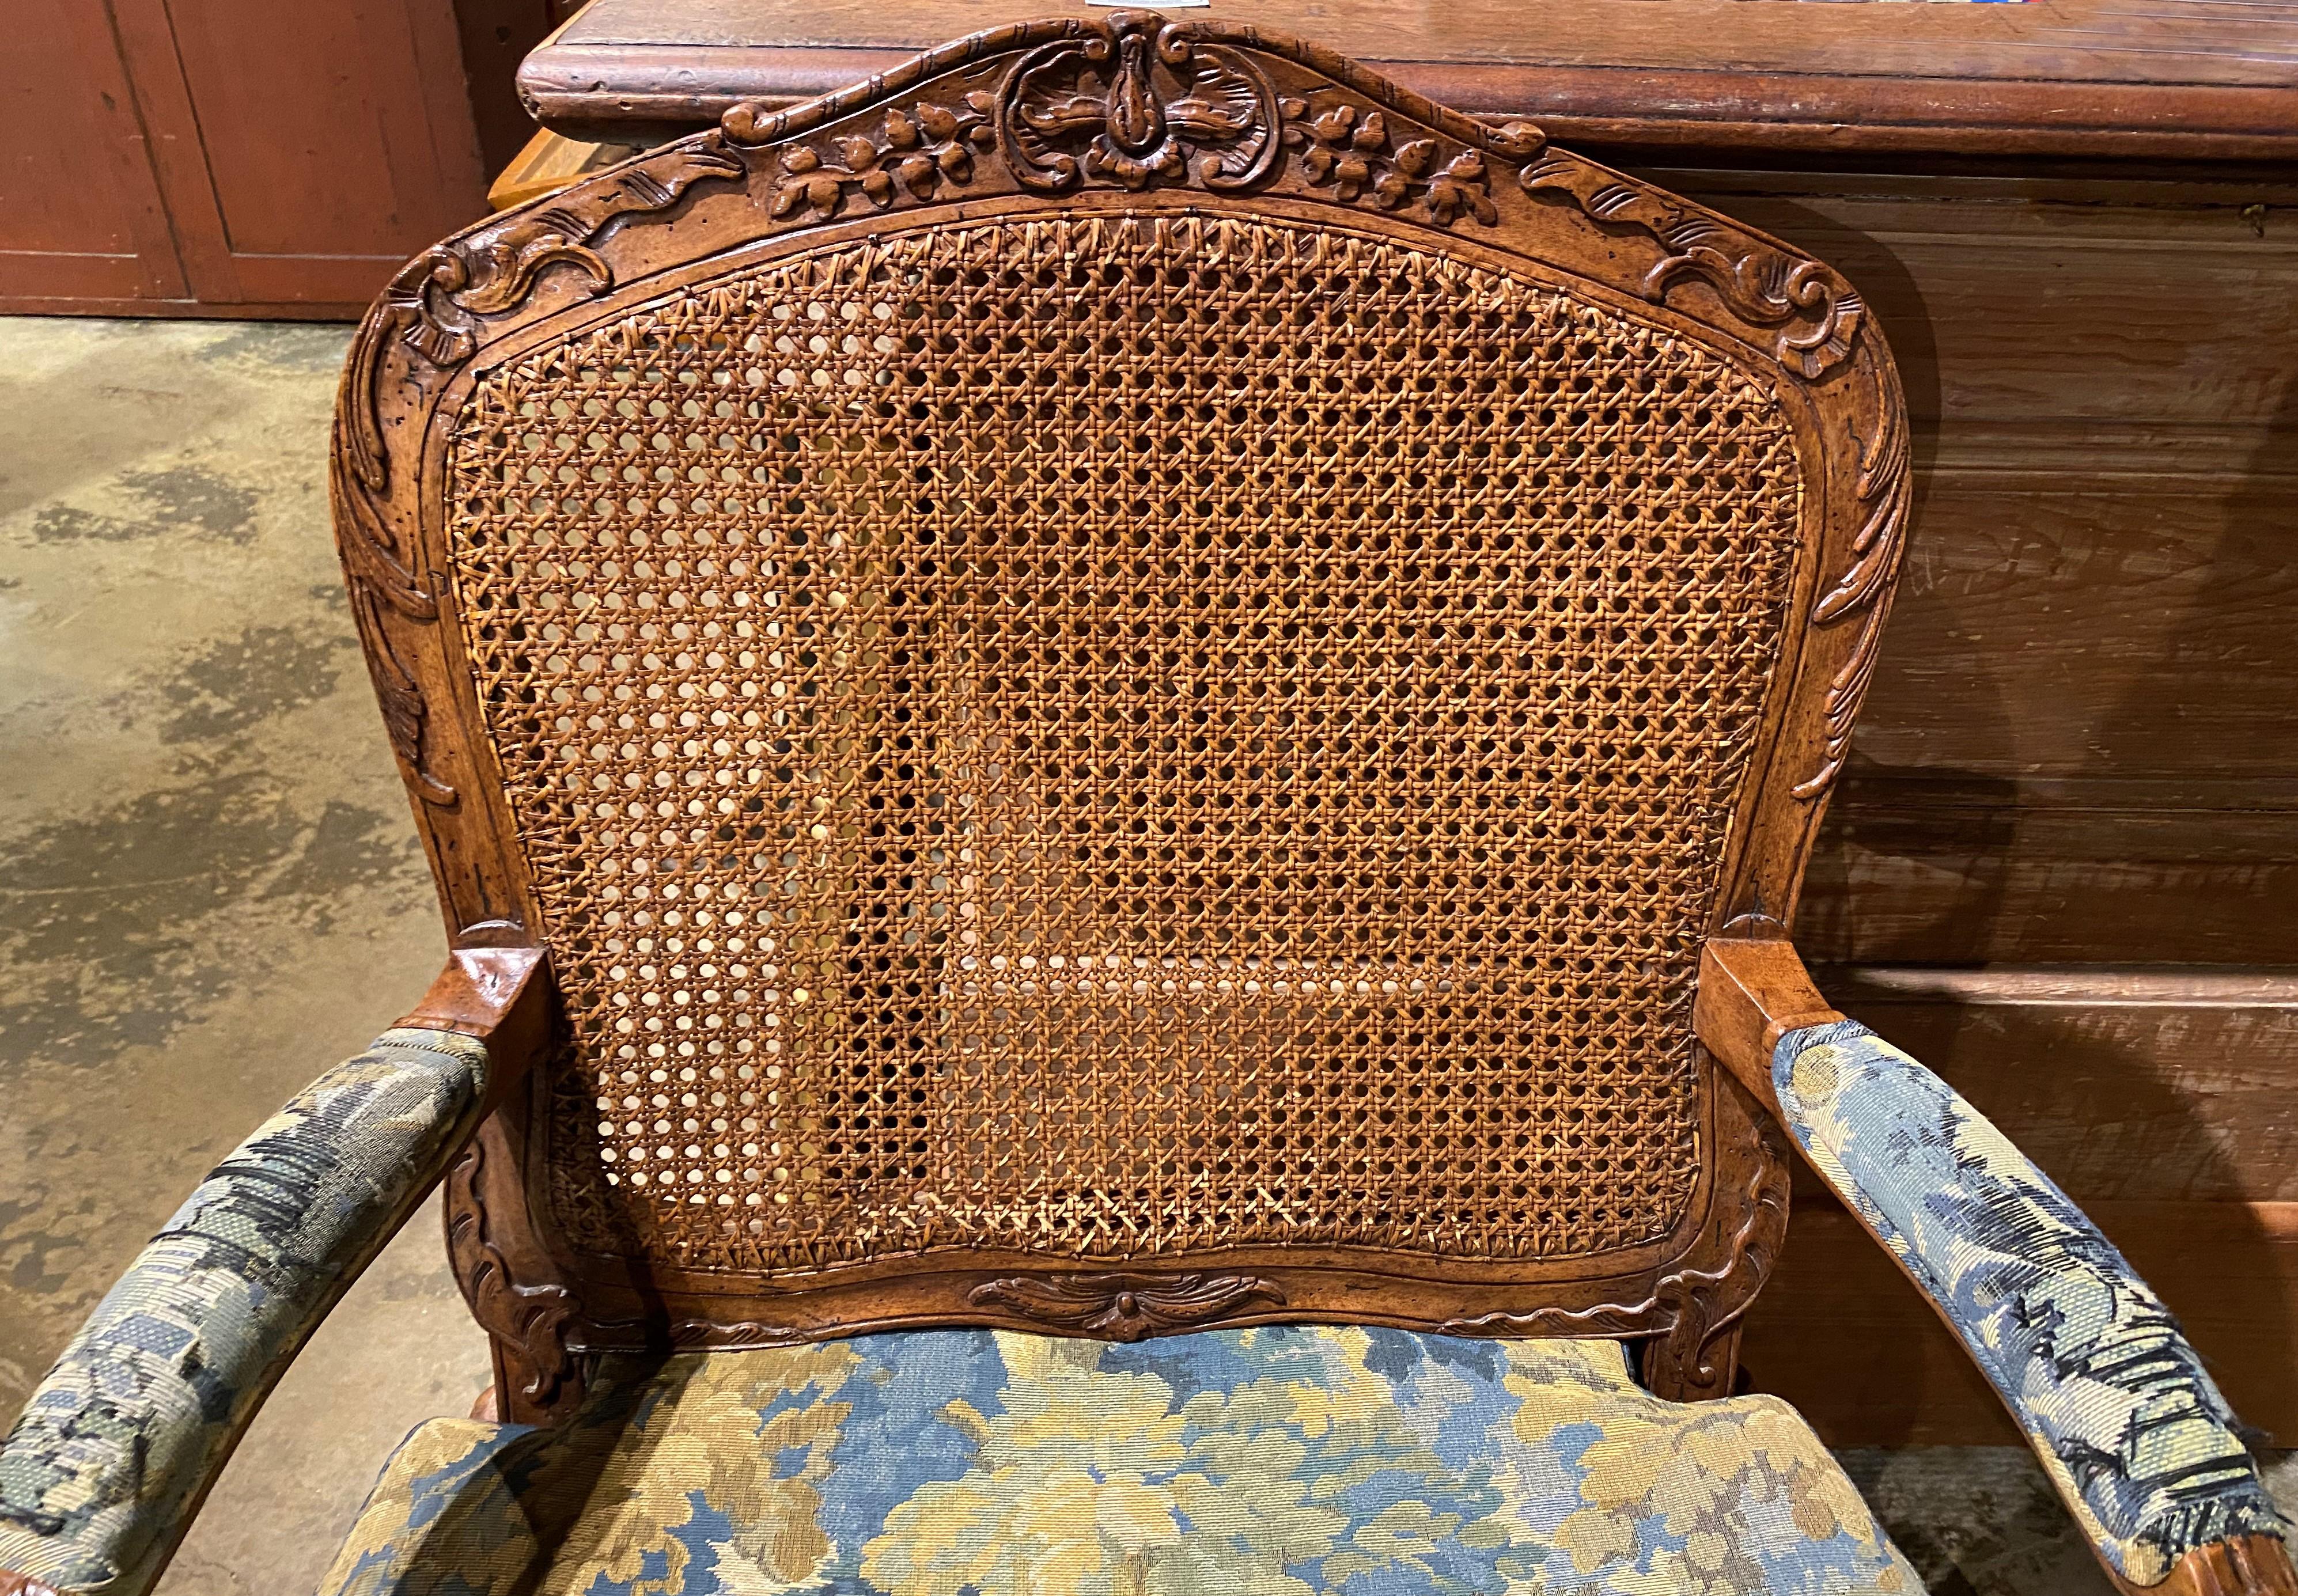 A fine pair of Louis XV caned fruitwood fauteuils or armchairs with foliate carved crests, arms, and legs, custom upholstered arms and removable upholstered cushions. This pair dates to the 19th century with later upholstery, great overall patina,